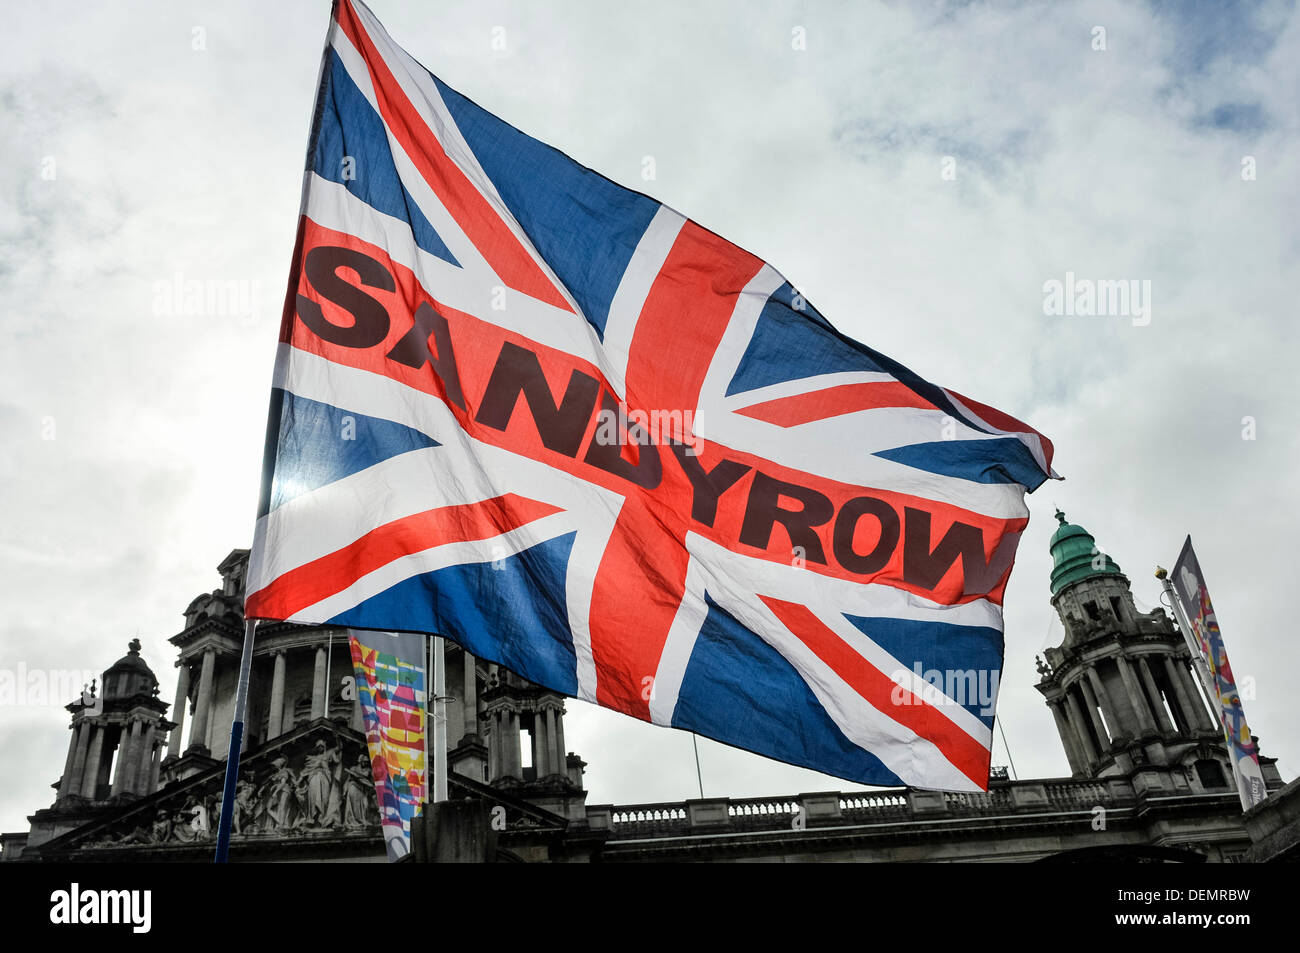 Belfast, Northern Ireland, 21st September 2013 - Union Flag with "Sandy Row" across the middle is waved in front of Belfast City Hall Credit:  Stephen Barnes/Alamy Live News Stock Photo